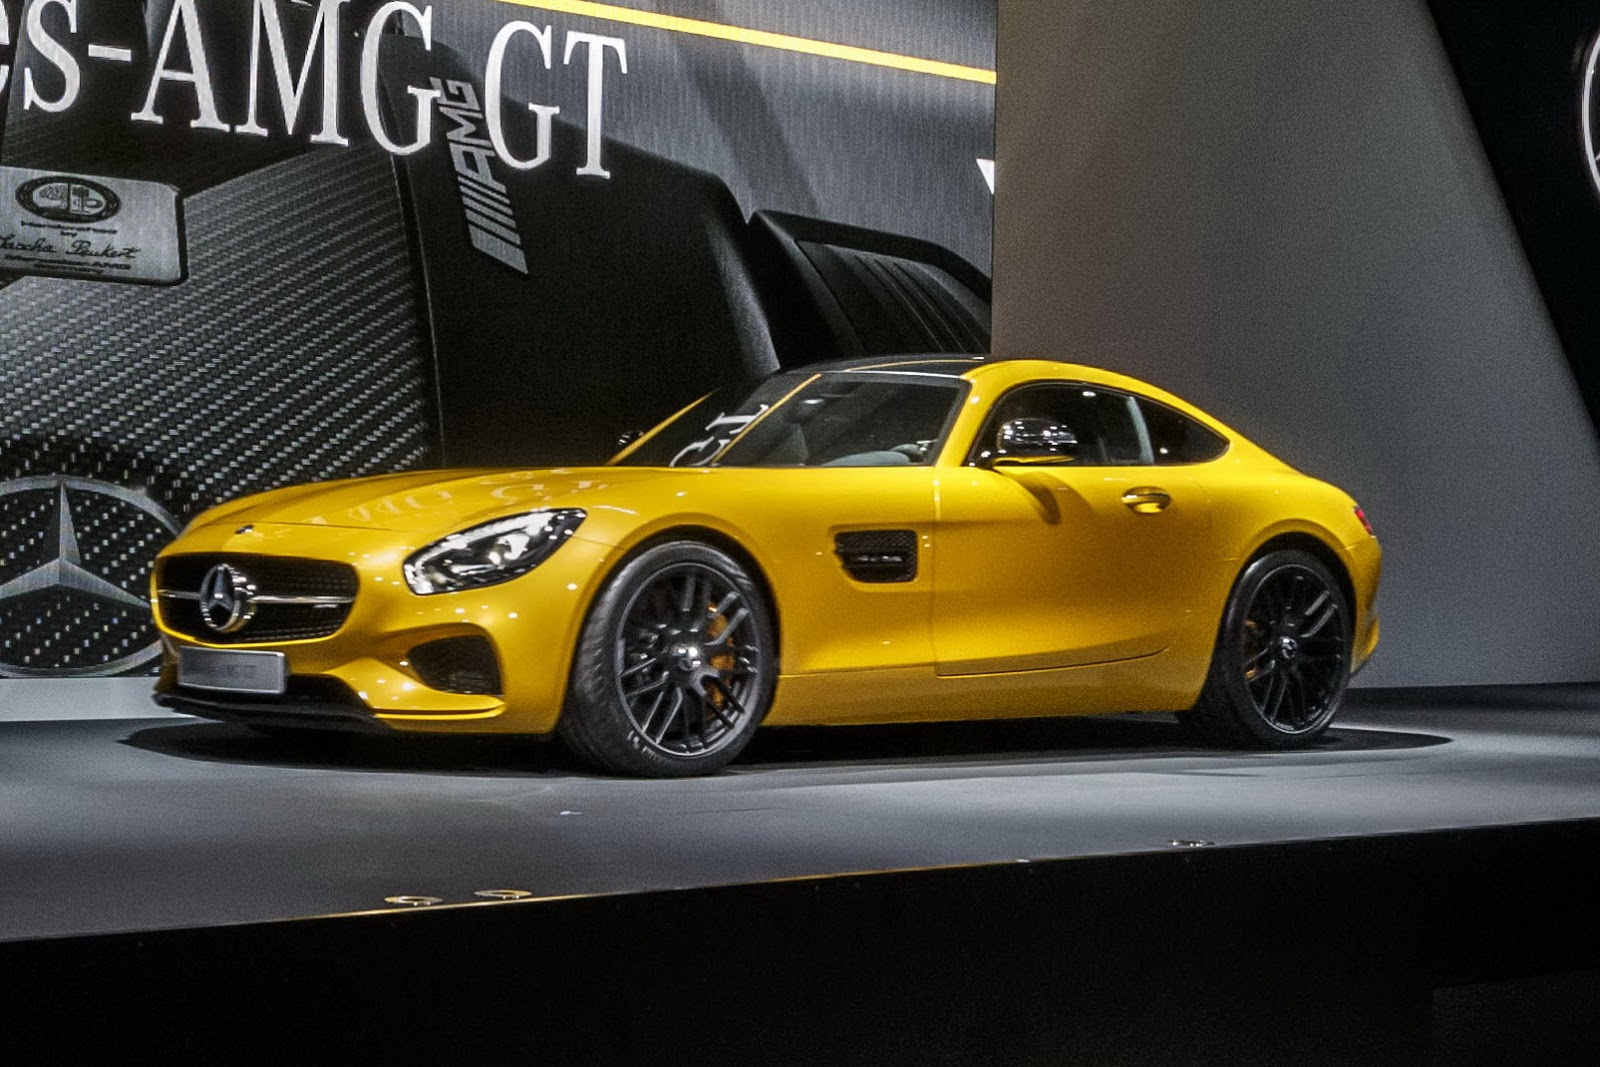 Mercedes-AMG-GT-Carscoops3